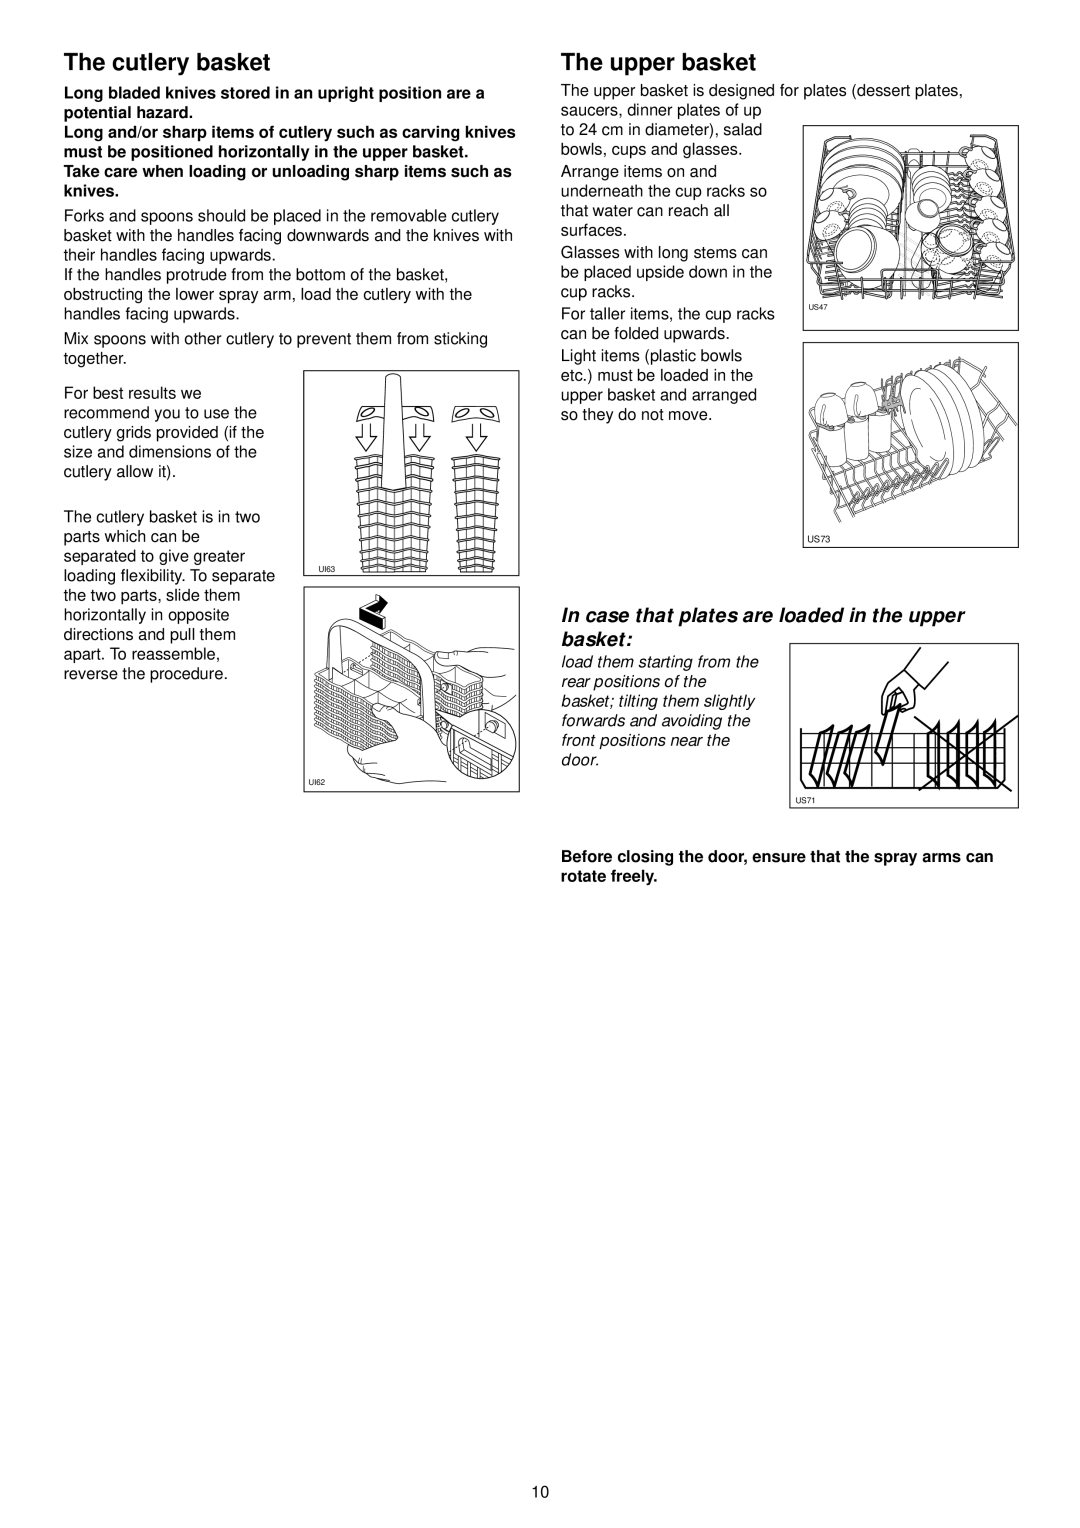 Zanussi ZSF 6152 manual The cutlery basket, The upper basket, In case that plates are loaded in the upper basket 